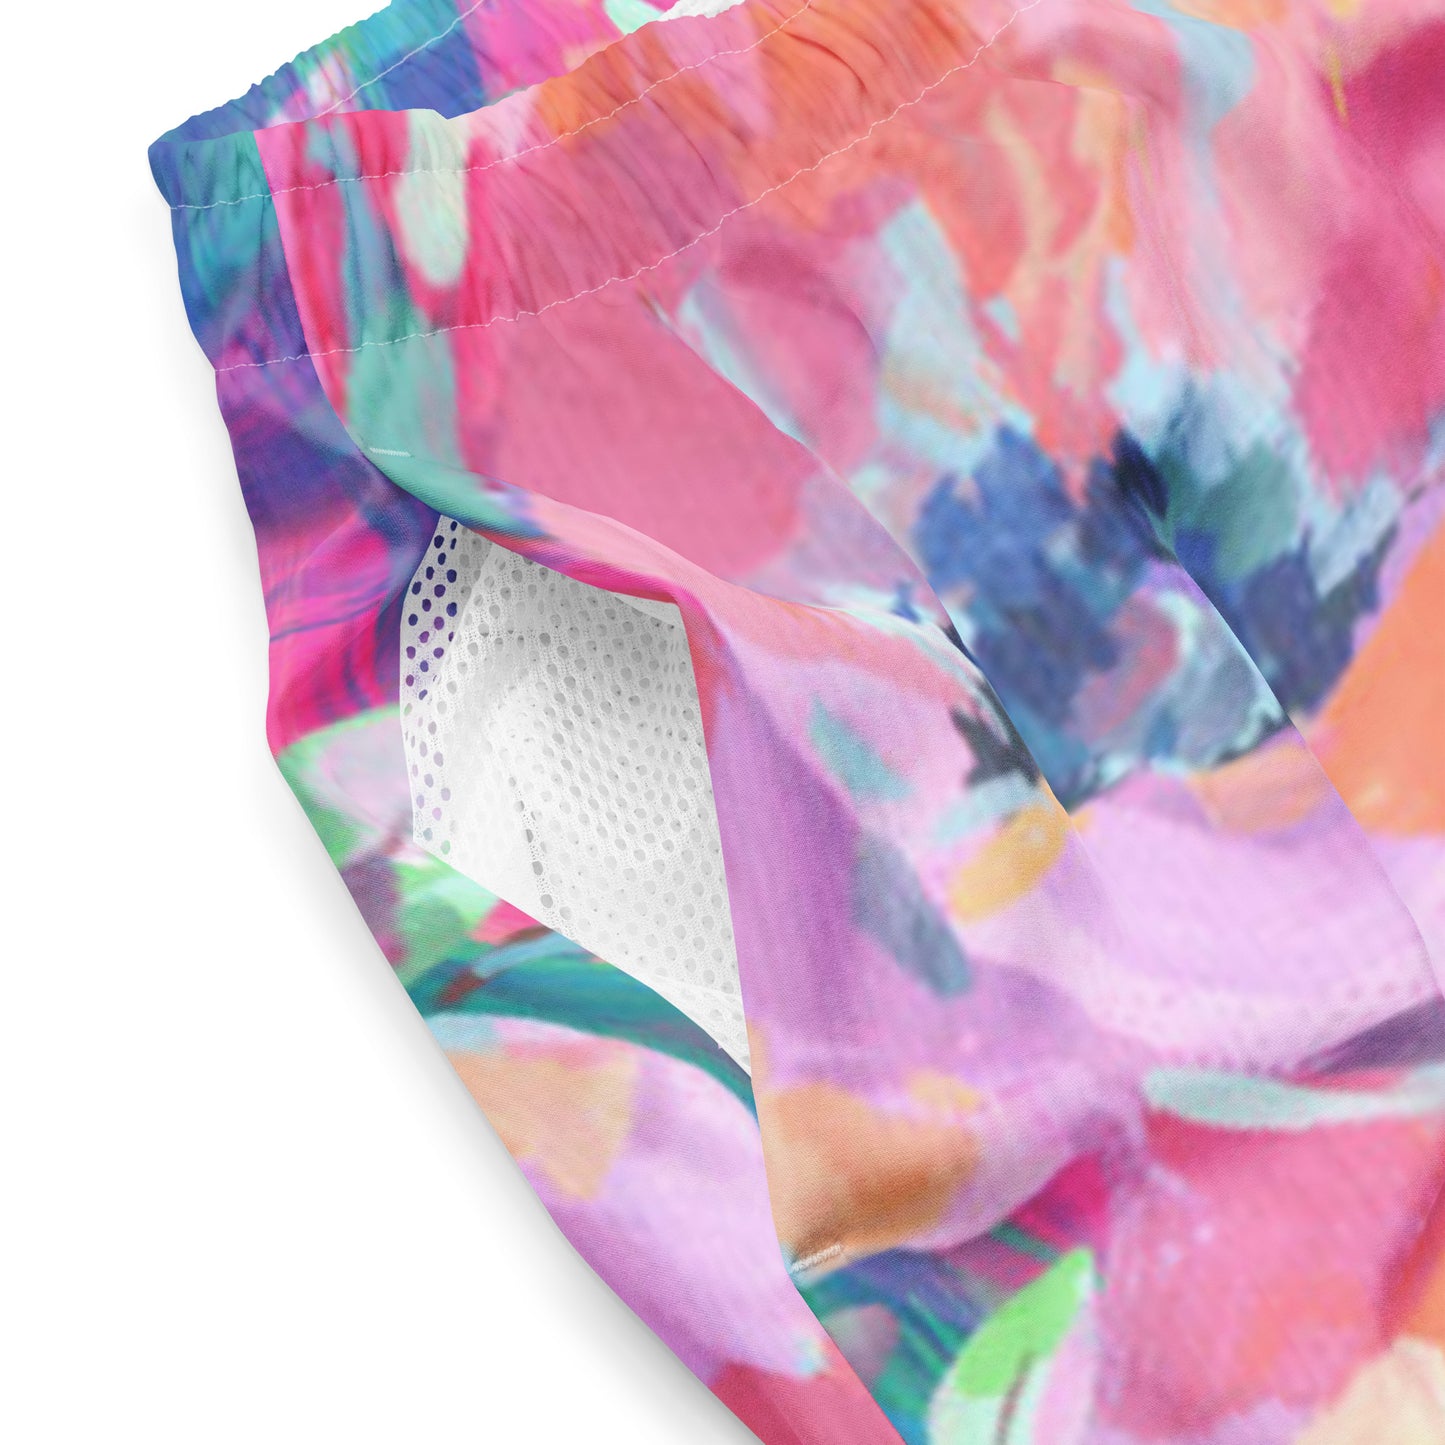 Humble Sportswear™ men's abstract floral pink mesh swim trunks